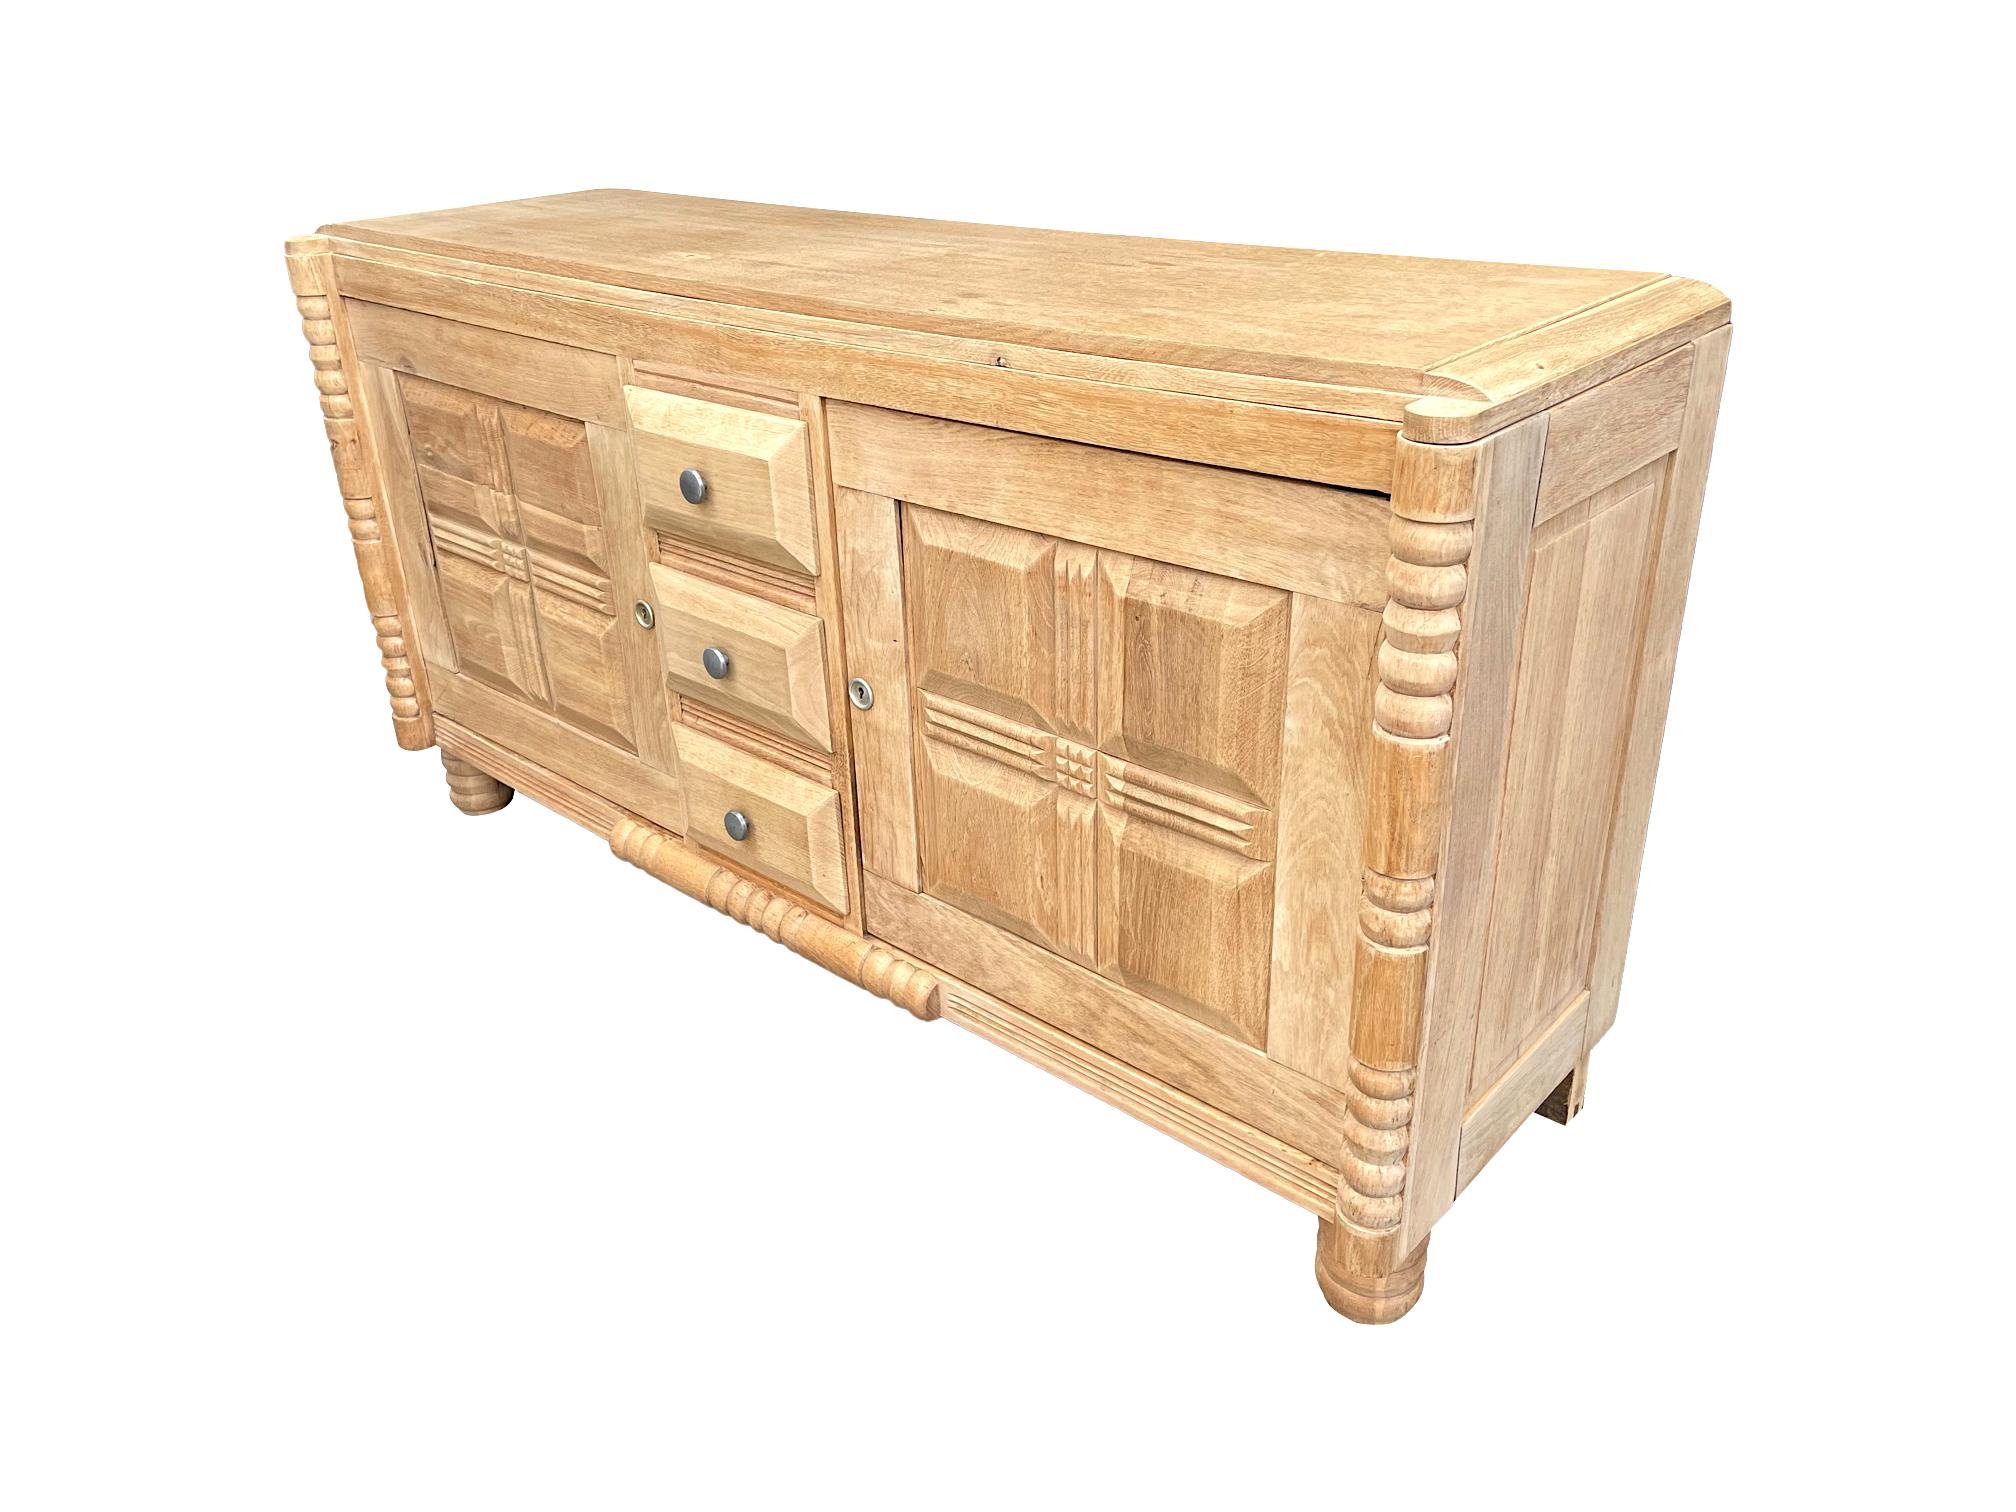 French Art Deco Natural Oak Sideboard by Gaston Poisson with Geometric Design